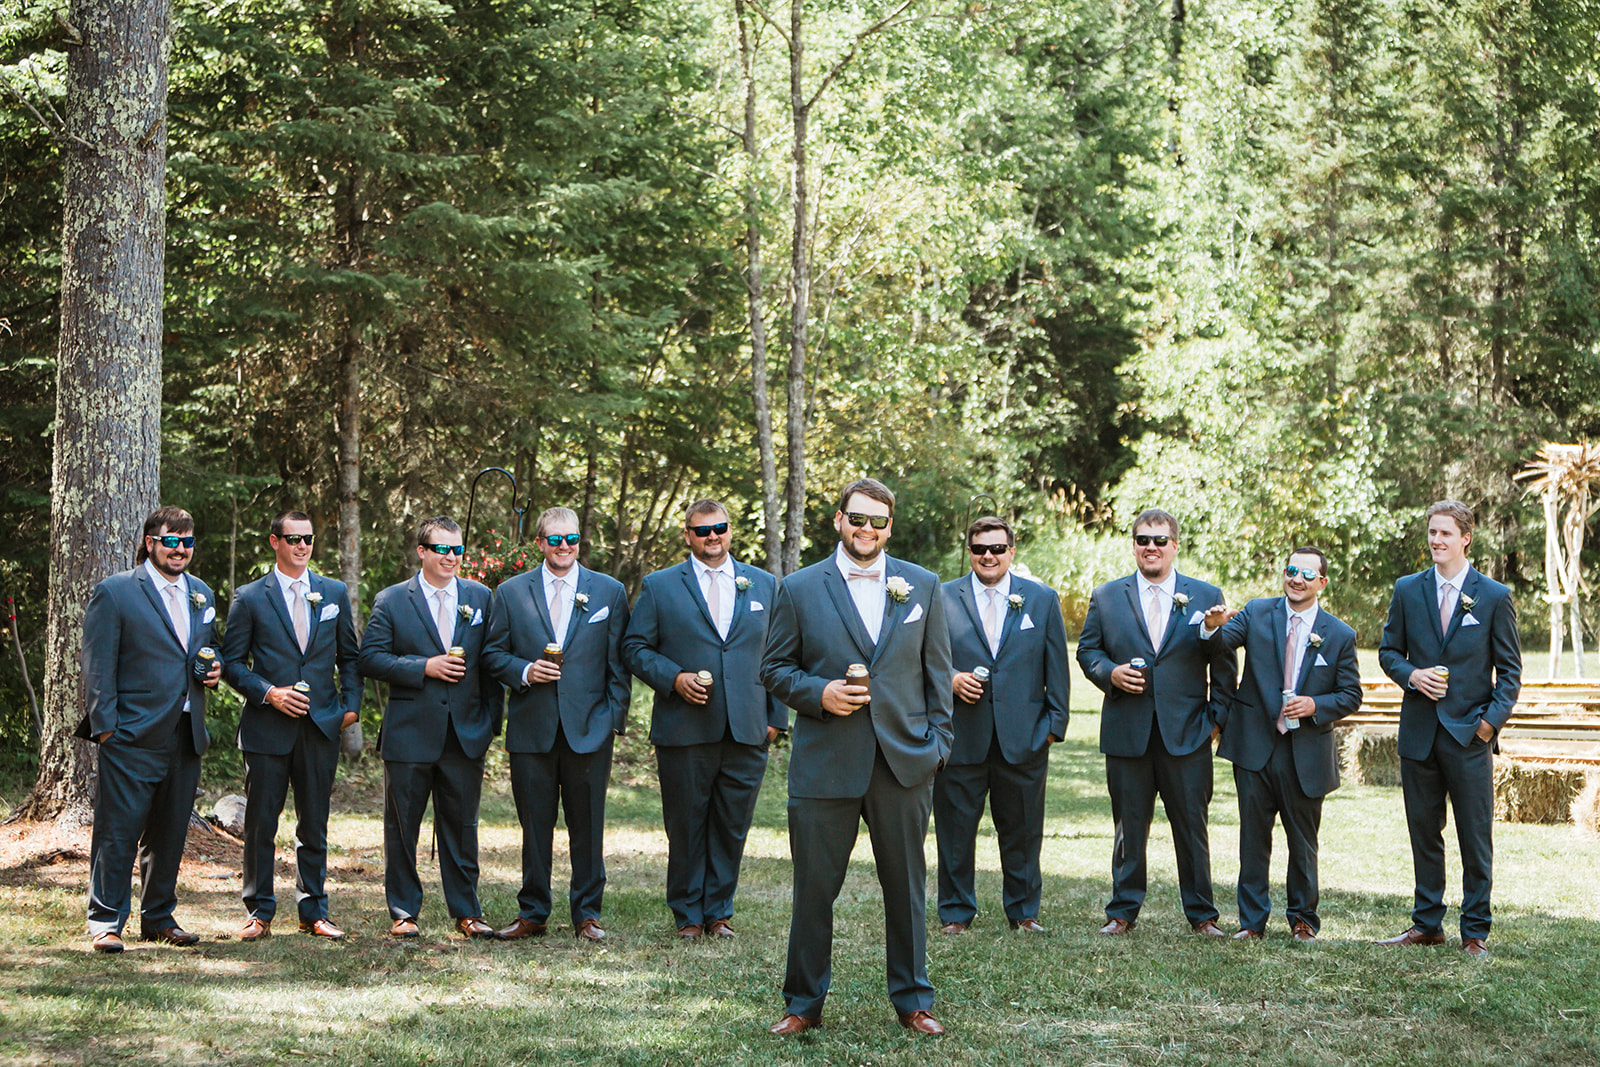 Groom and groomsmen photos from a summer wedding in Minnesota